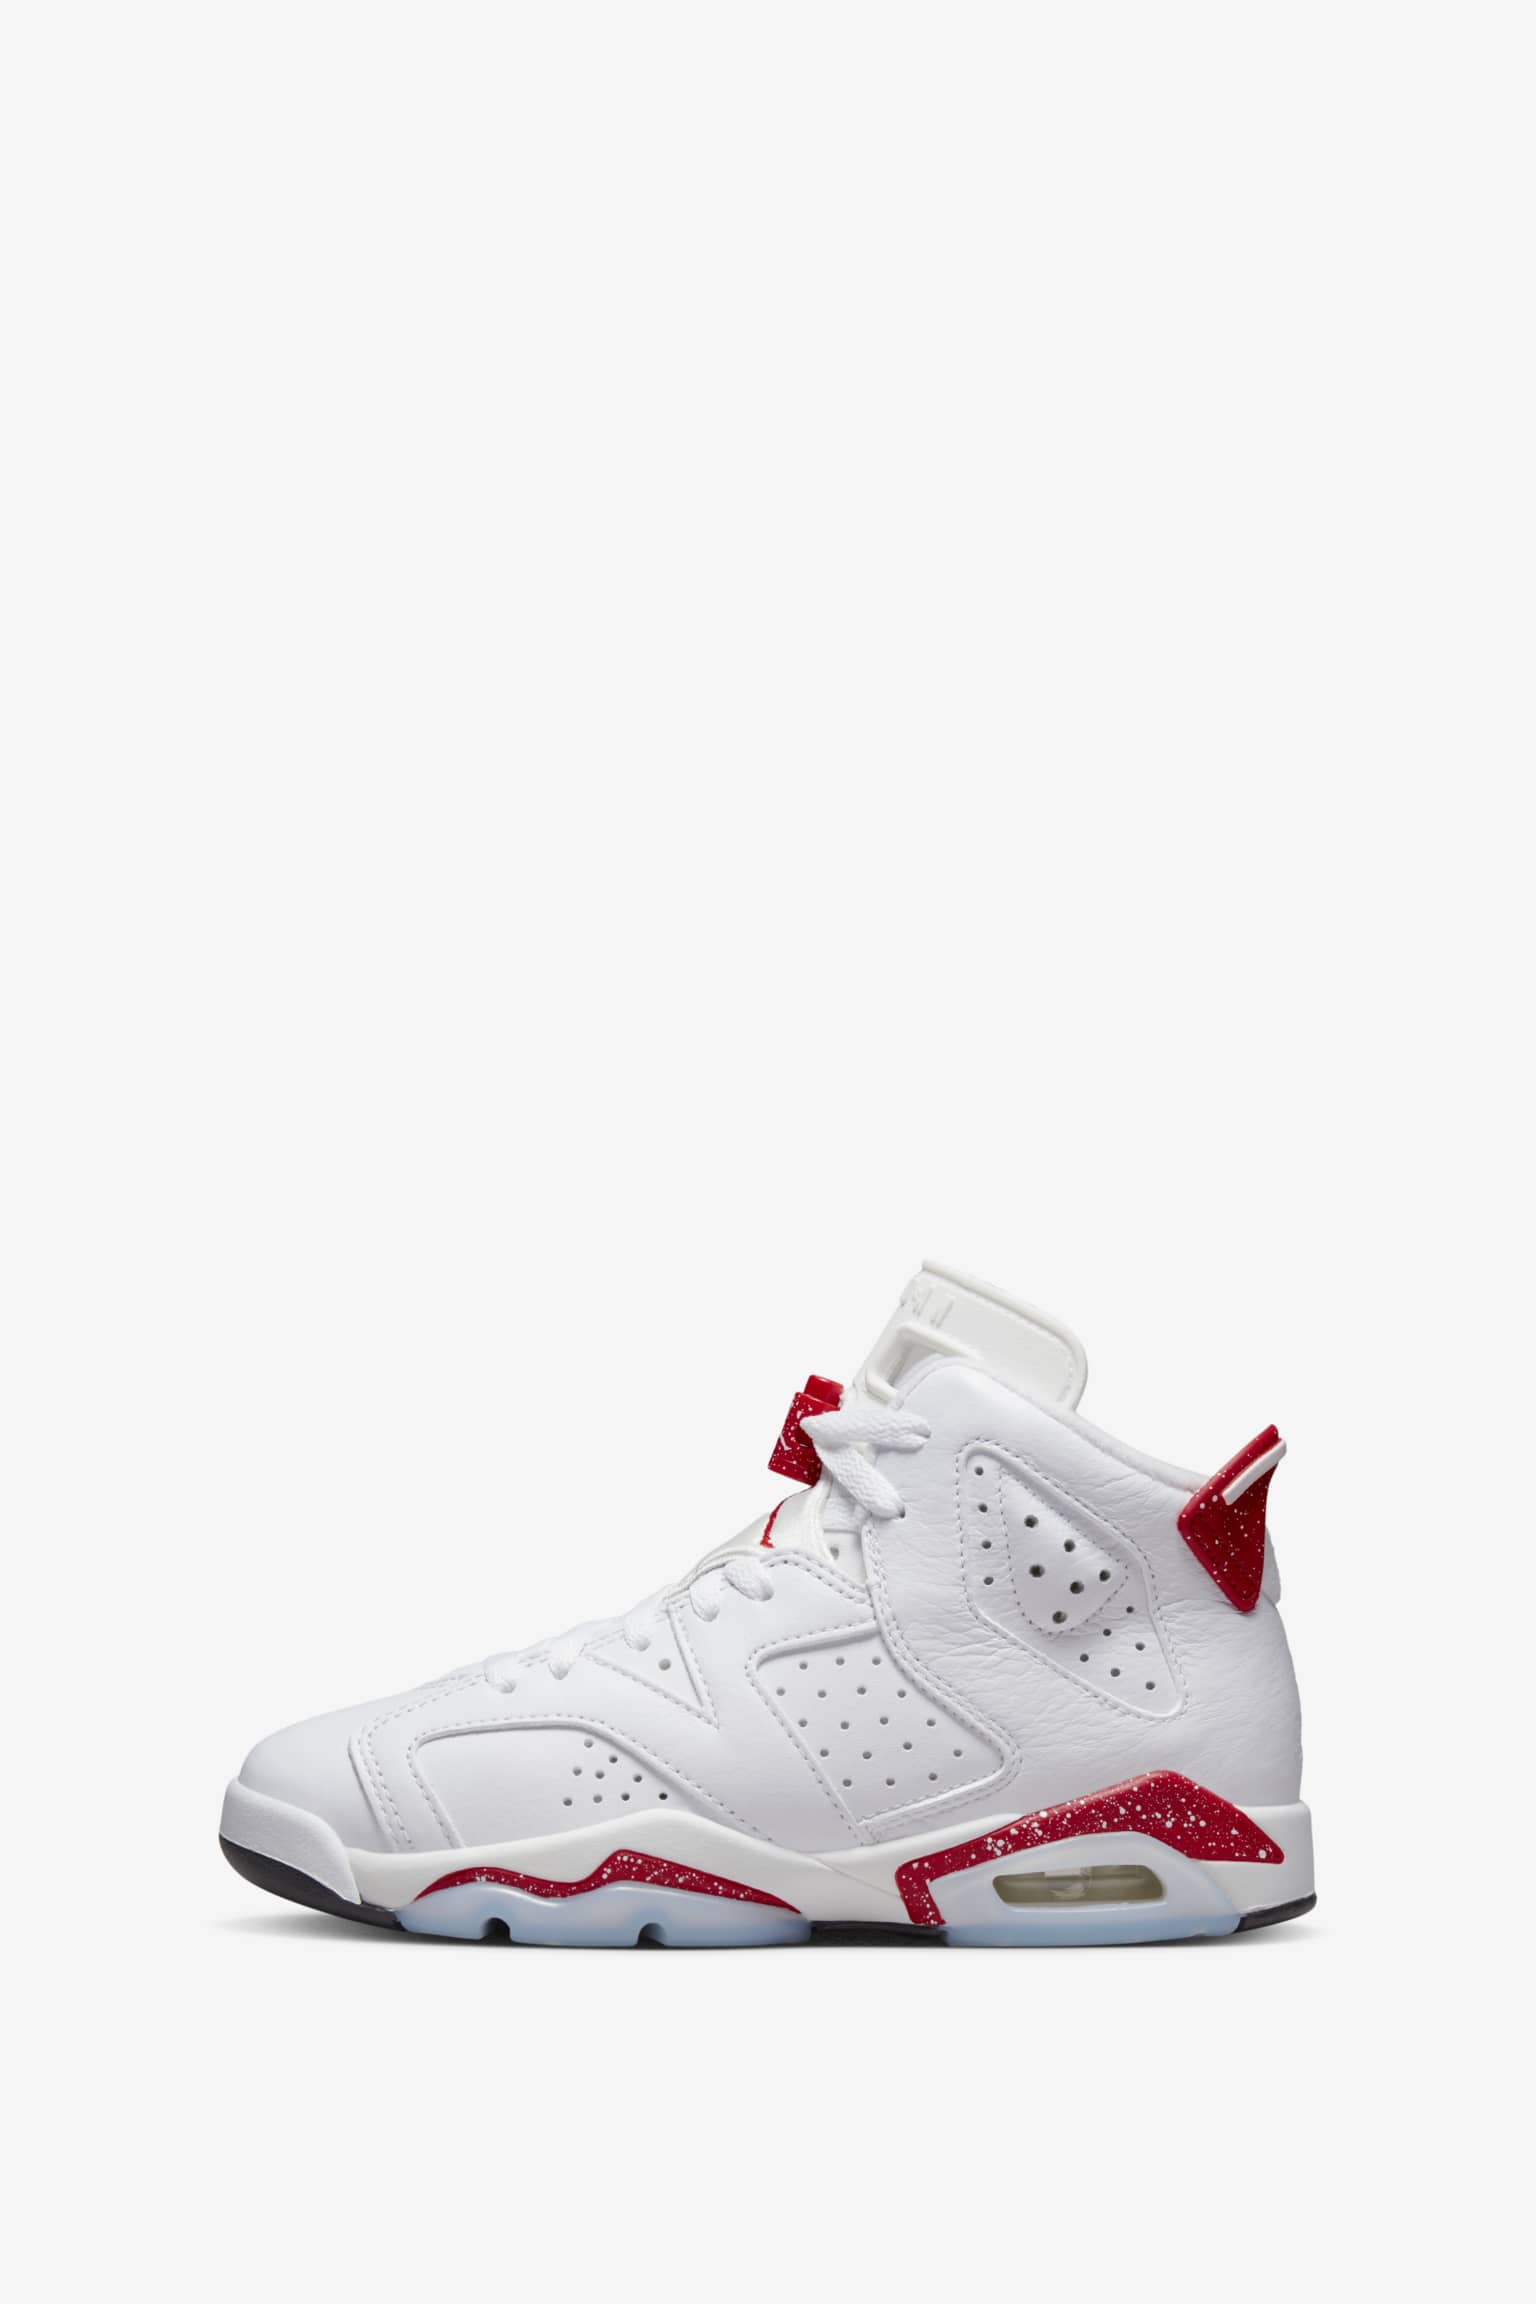 red and white jordan 6s